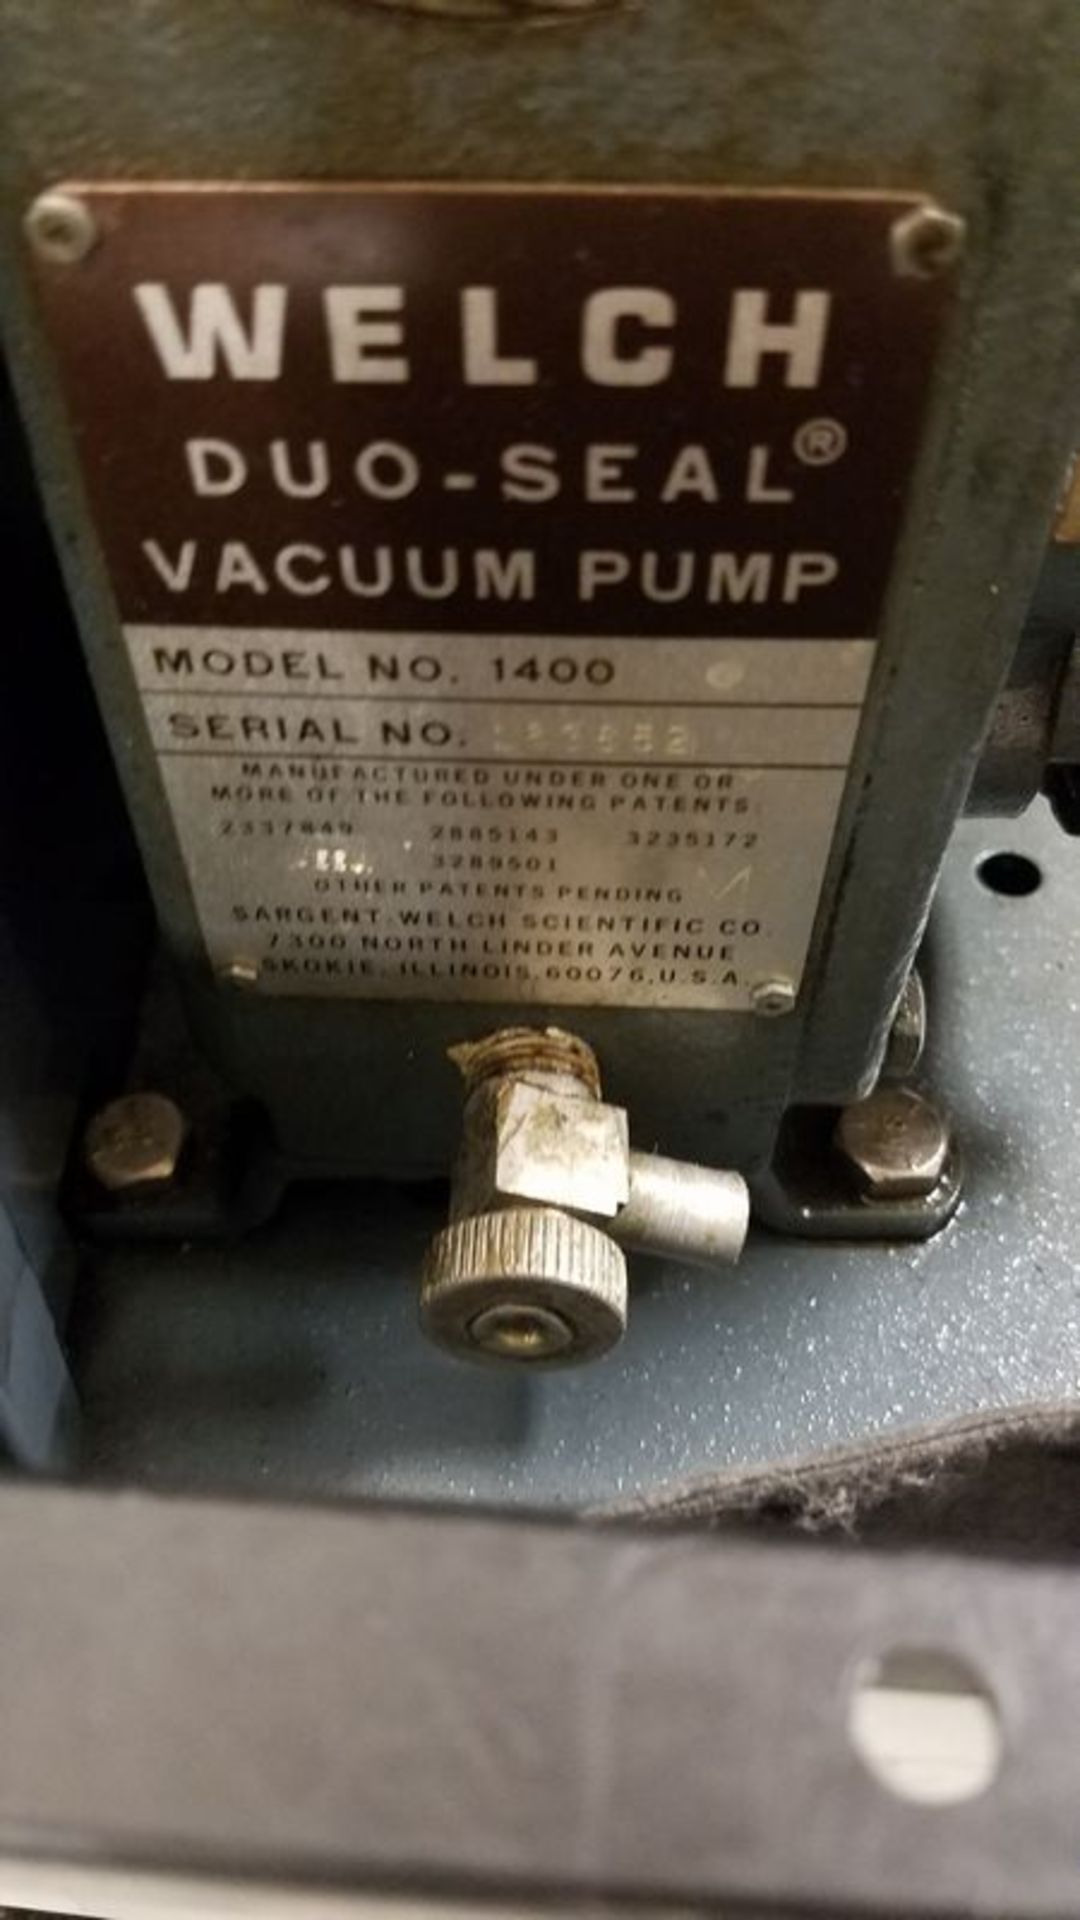 WELCH DUO-SEAL VACUUM PUMP W/GE 1/2 HP MOTOR M# 1400(LOCATED AT 627 HARTZELL ROAD NEW HAVEN IN - Image 2 of 3